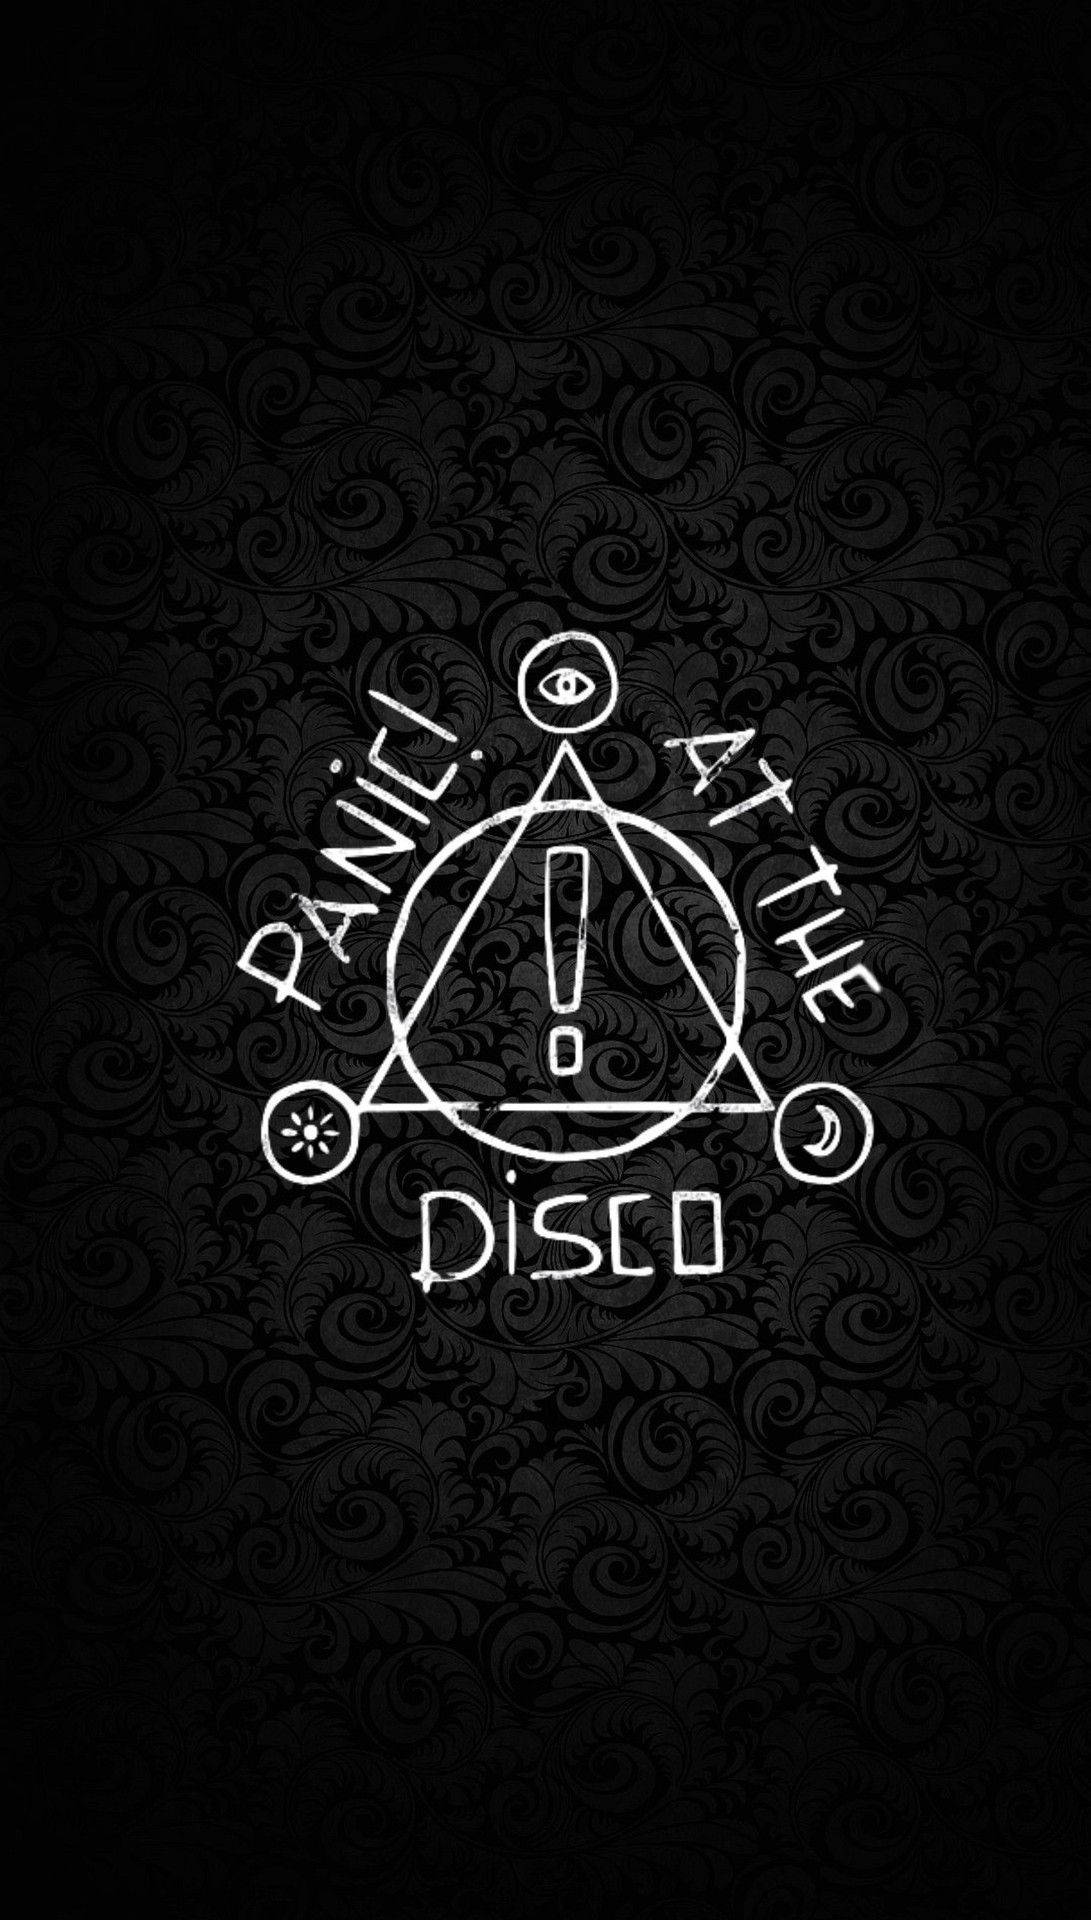 Panic! At The Disco Black Background